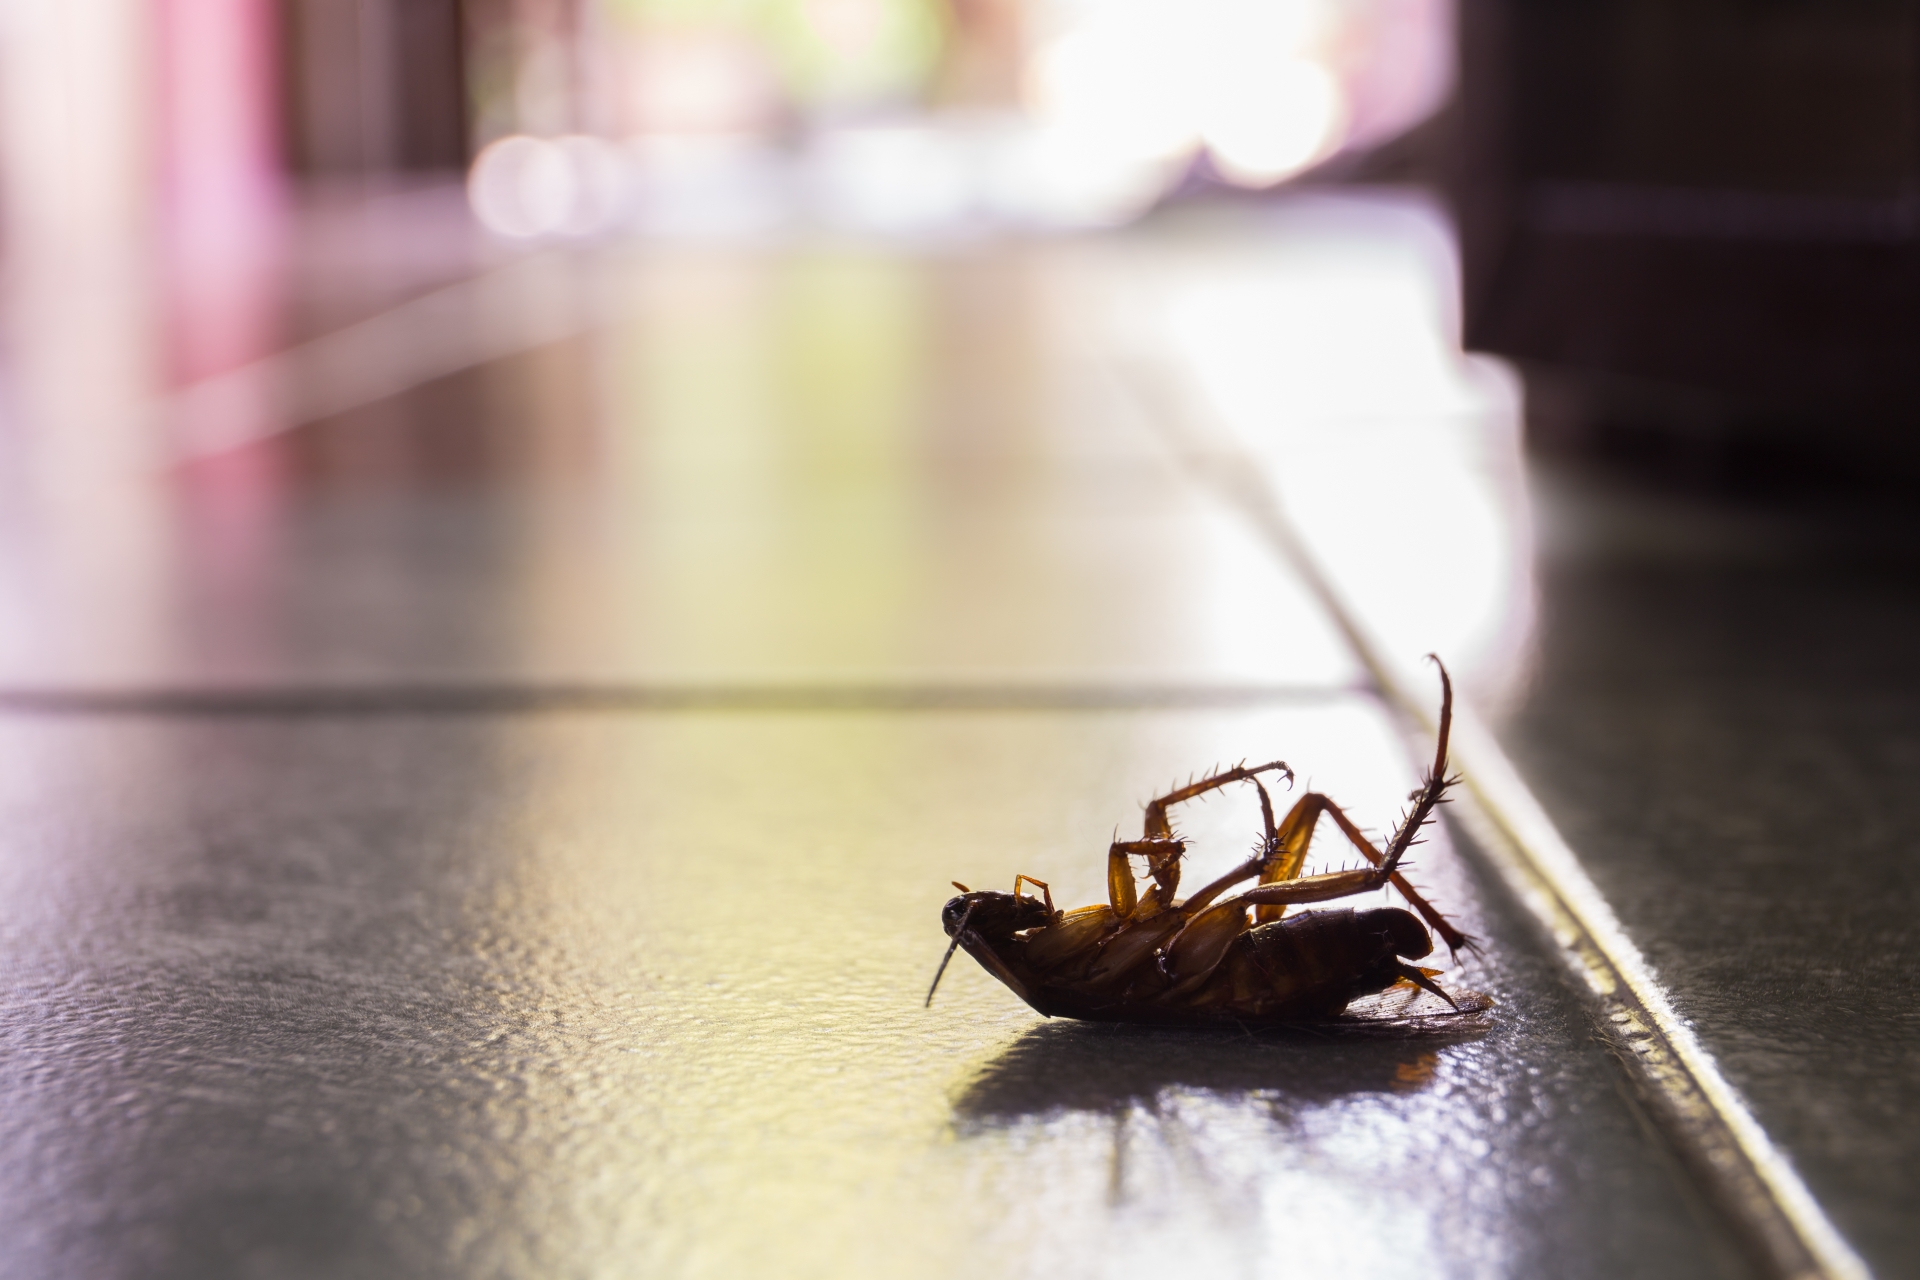 Cockroach Control, Pest Control in Coulsdon, Old Coulsdon, Chipstead, CR5. Call Now 020 8166 9746